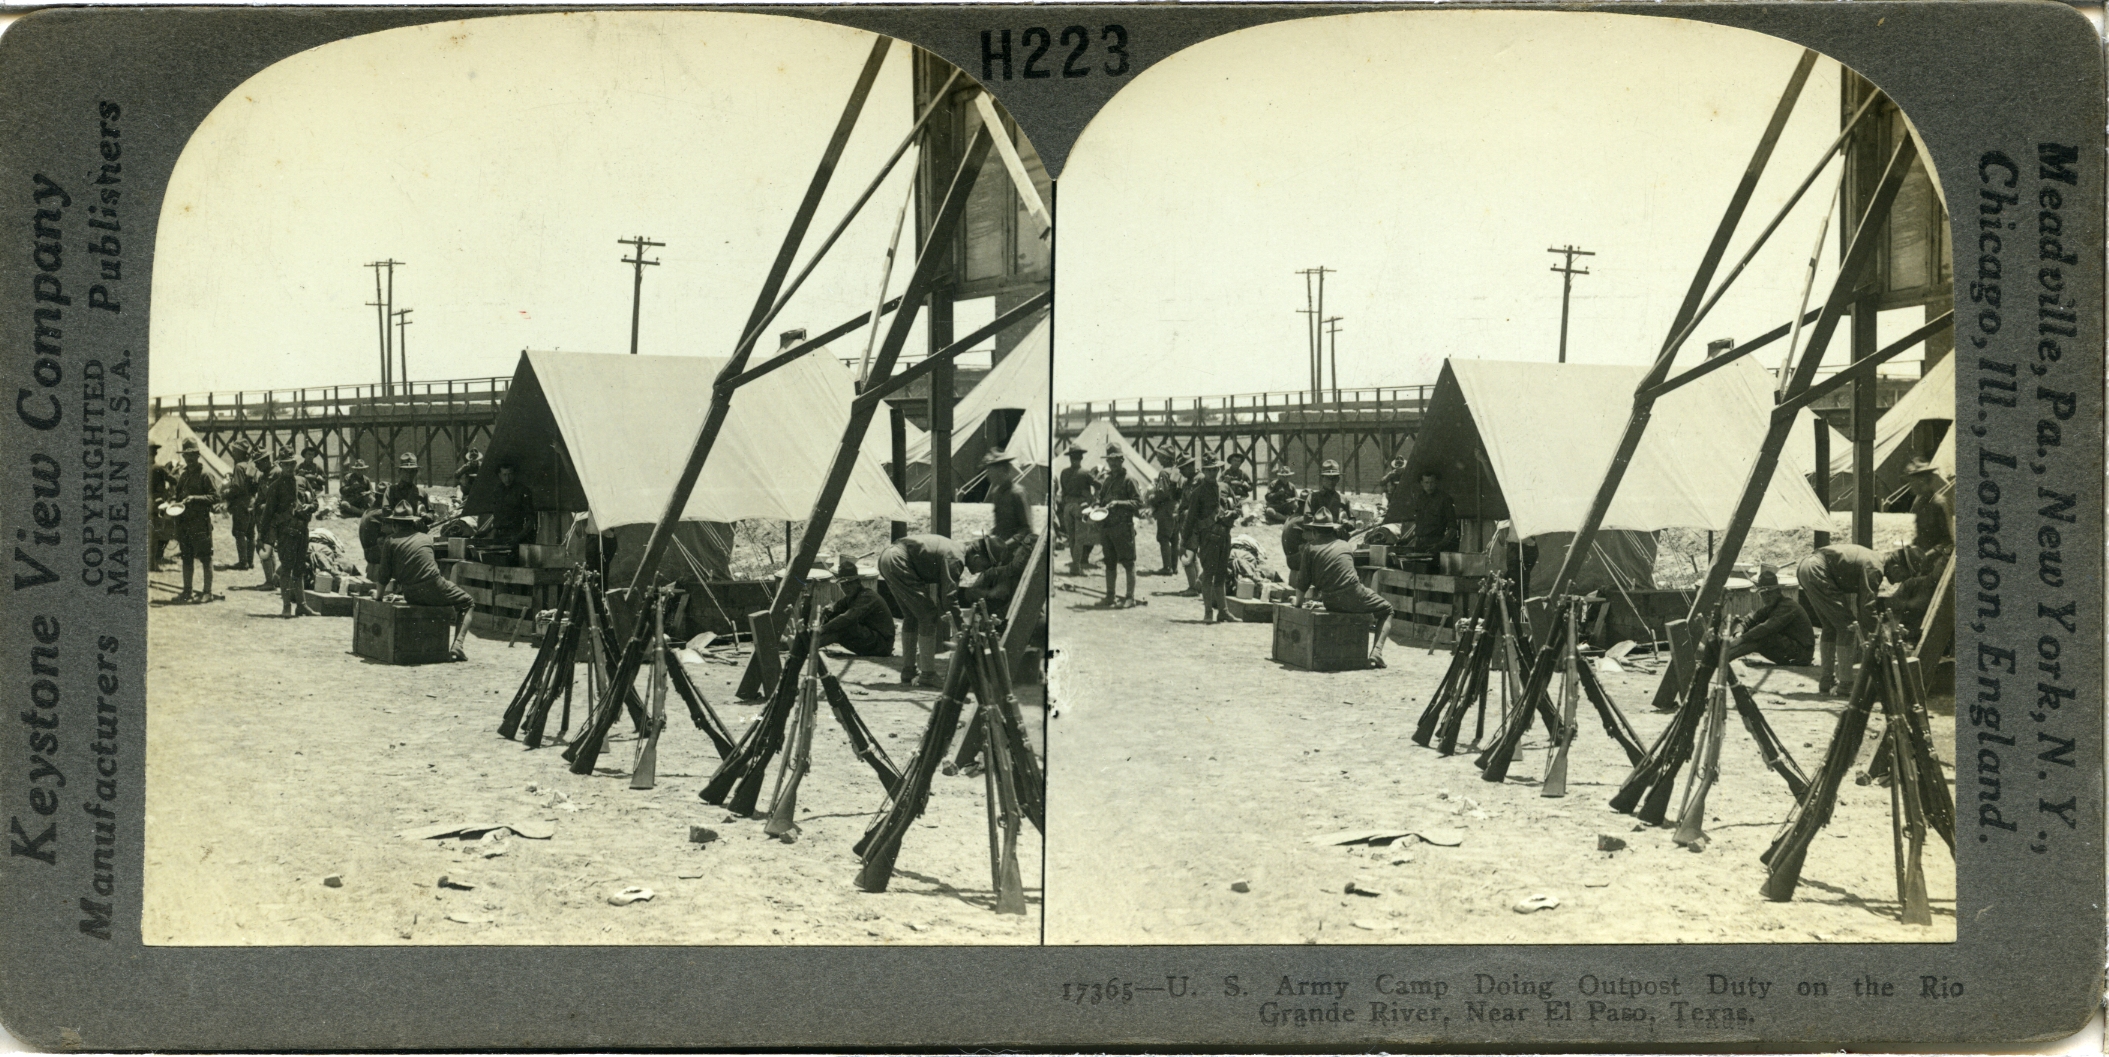 U.S. Army Camp Doing Outpost Duty on the Rio Grande River, near El Paso, Texas